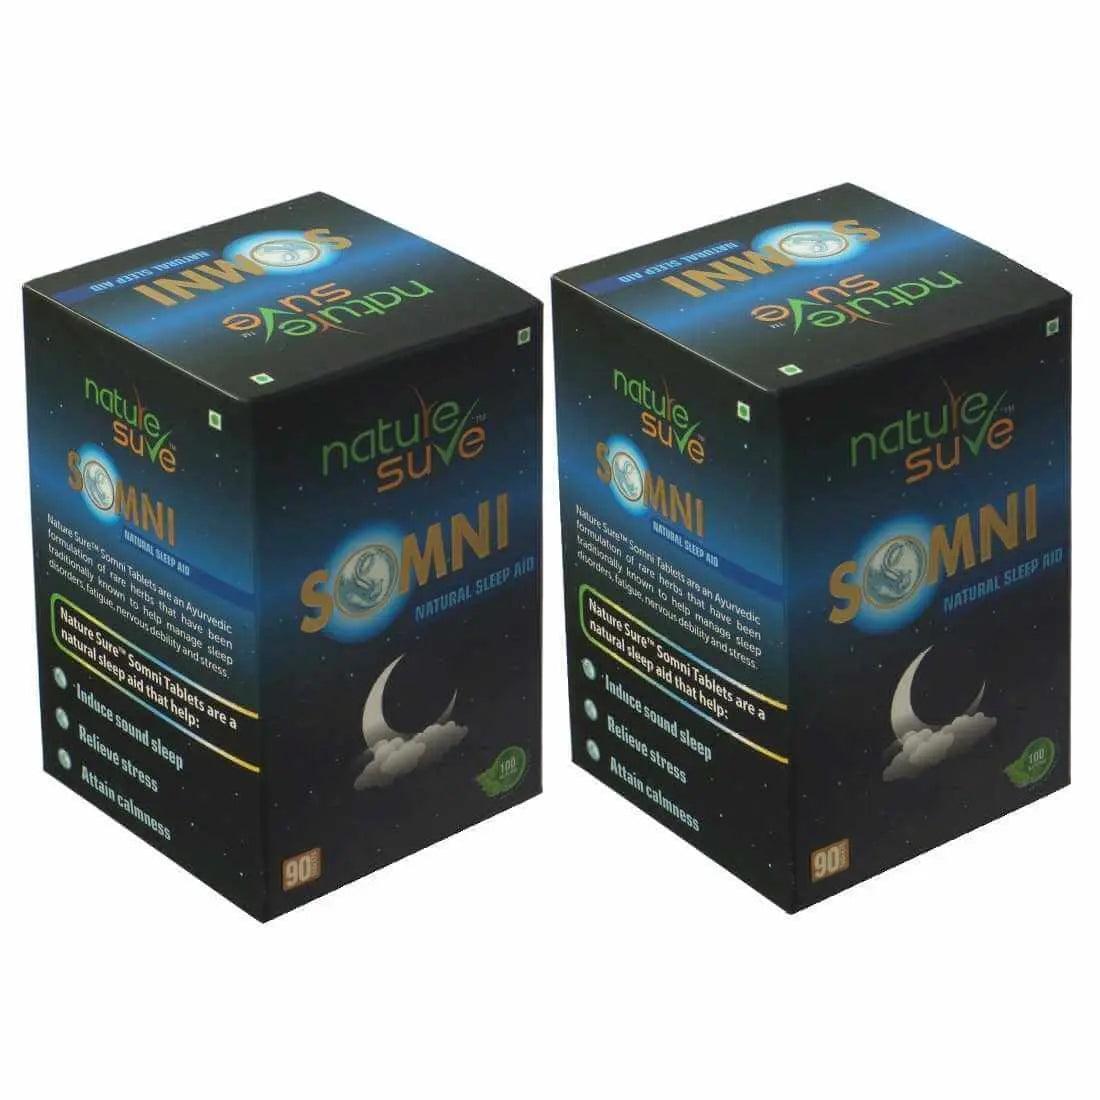 Nature Sure SOMNI Natural Sleep Aid Tablets for Men and Women - 90 Tablets 8903540010510